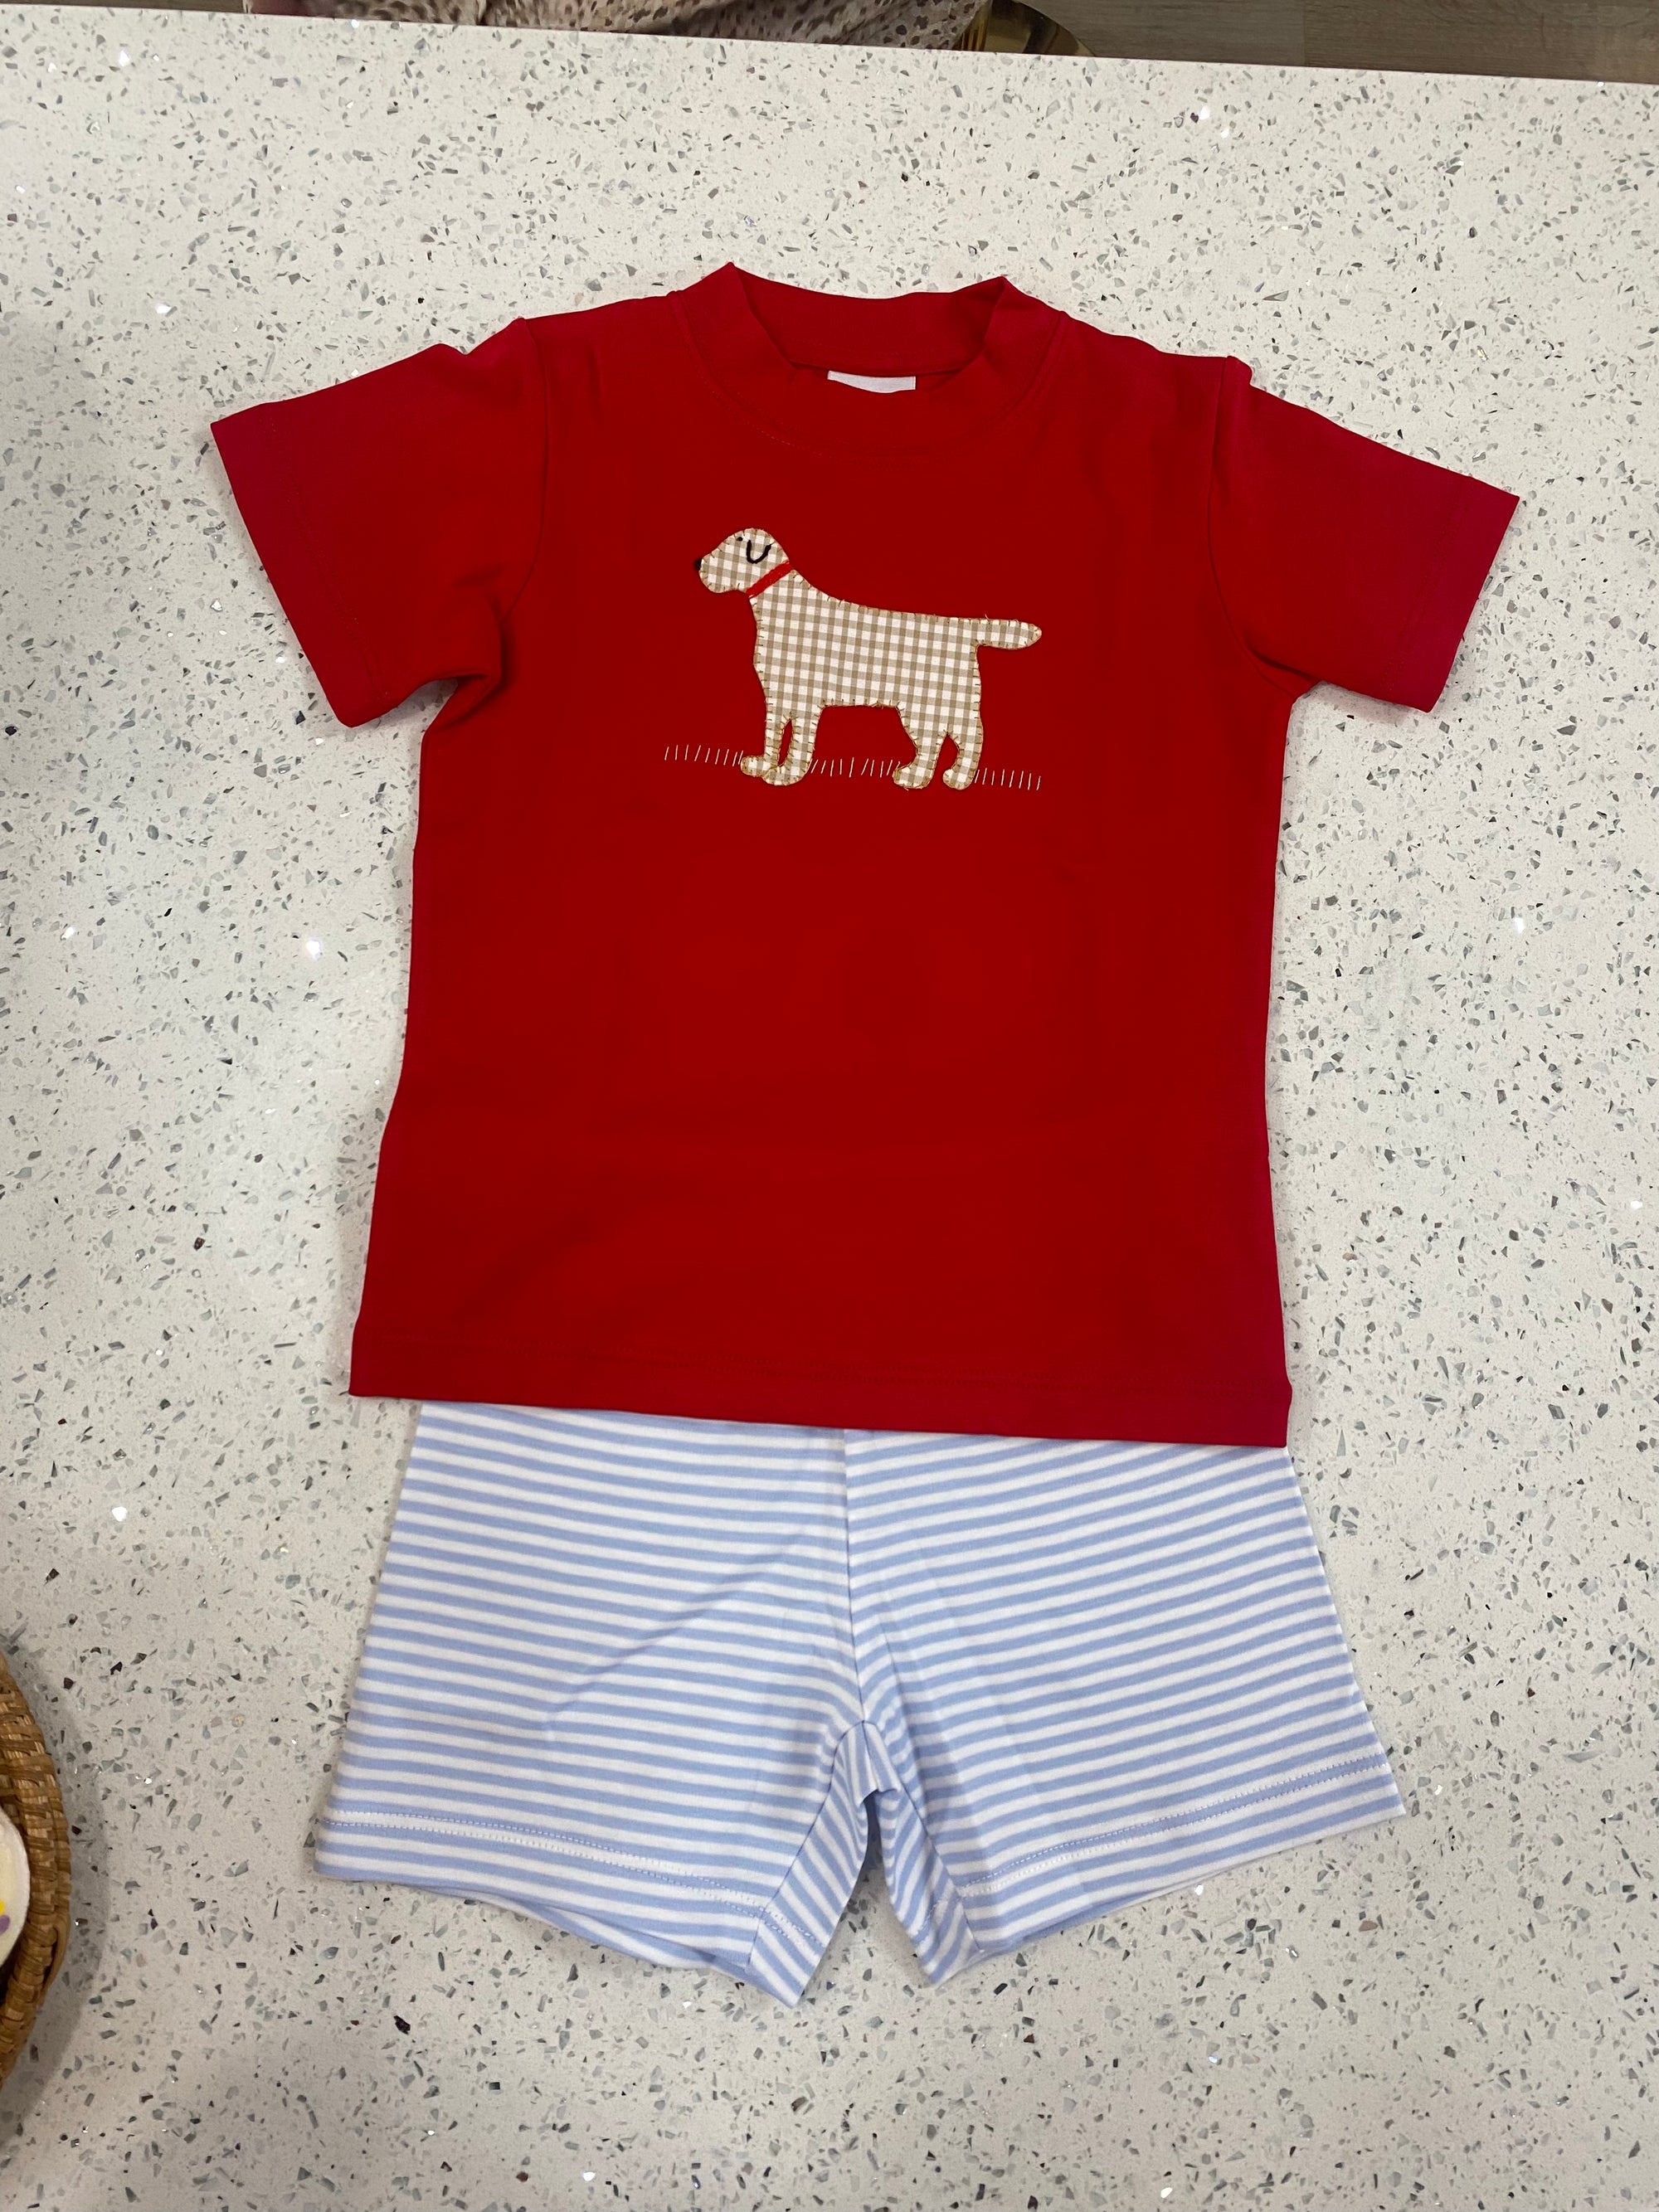 Squiggles: Red Dog Shirt w/ Blue Stripe Shorts